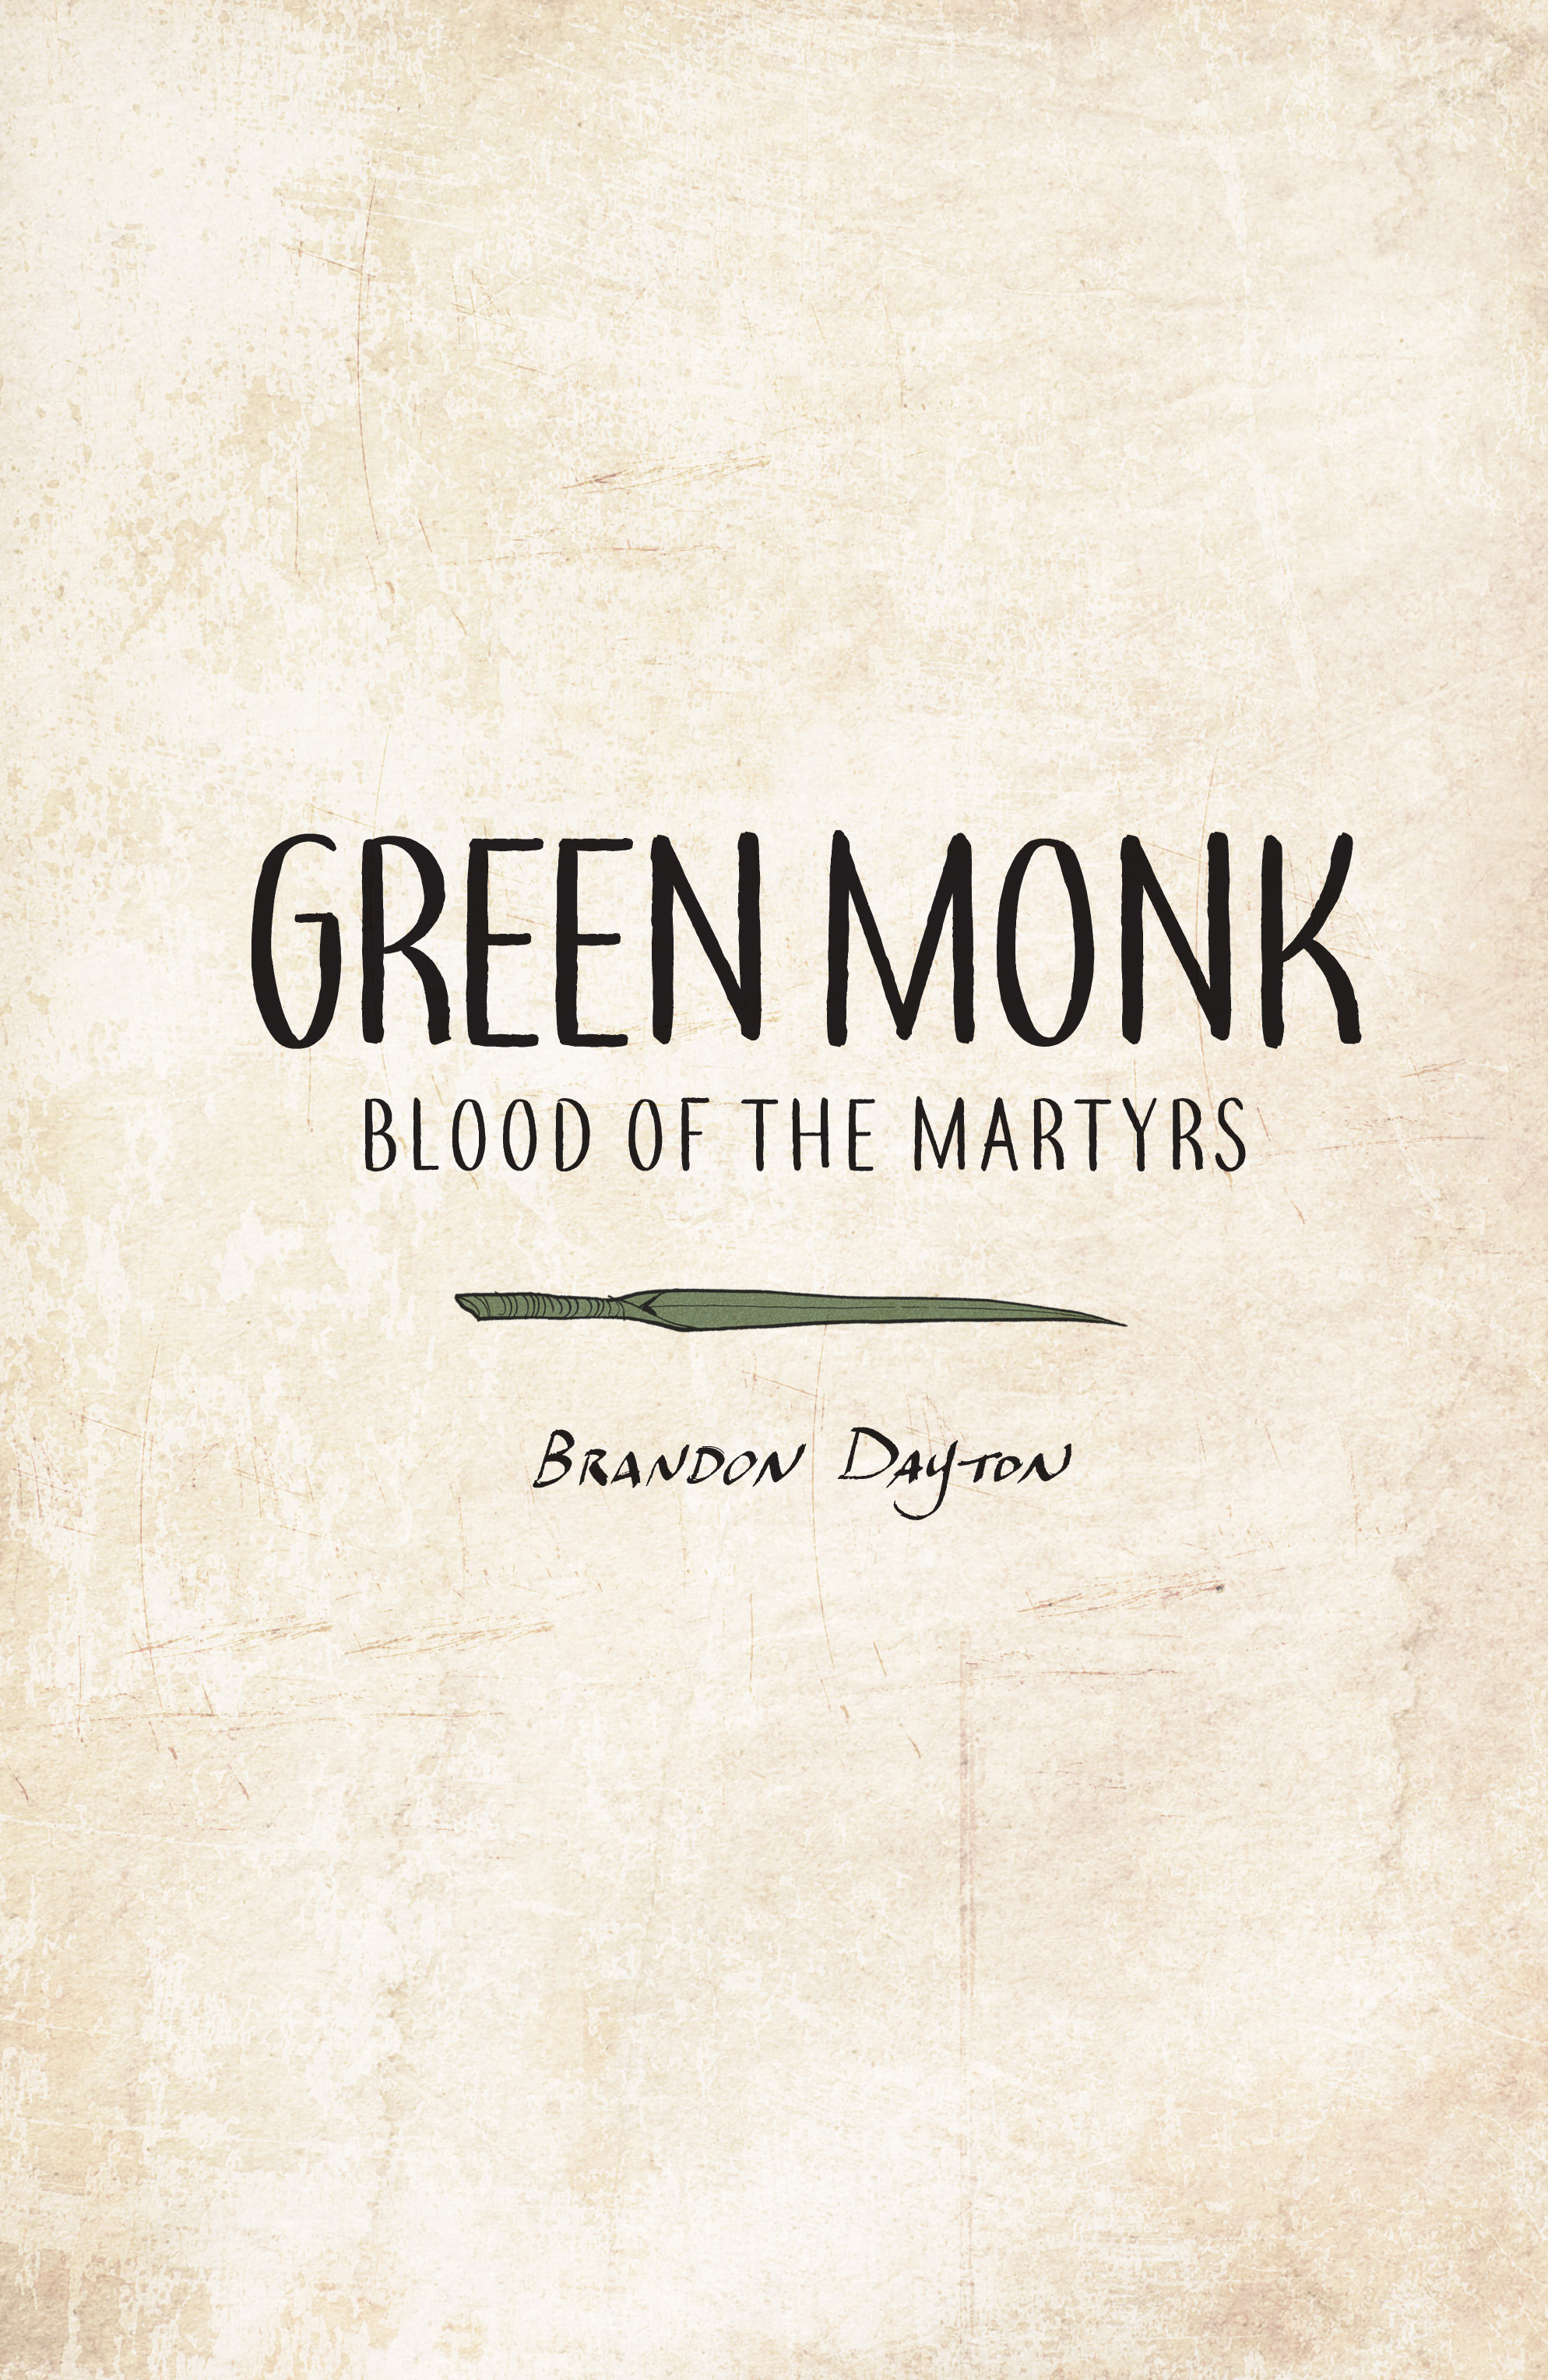 Read online Green Monk: Blood of the Martyrs comic -  Issue # TPB - 2